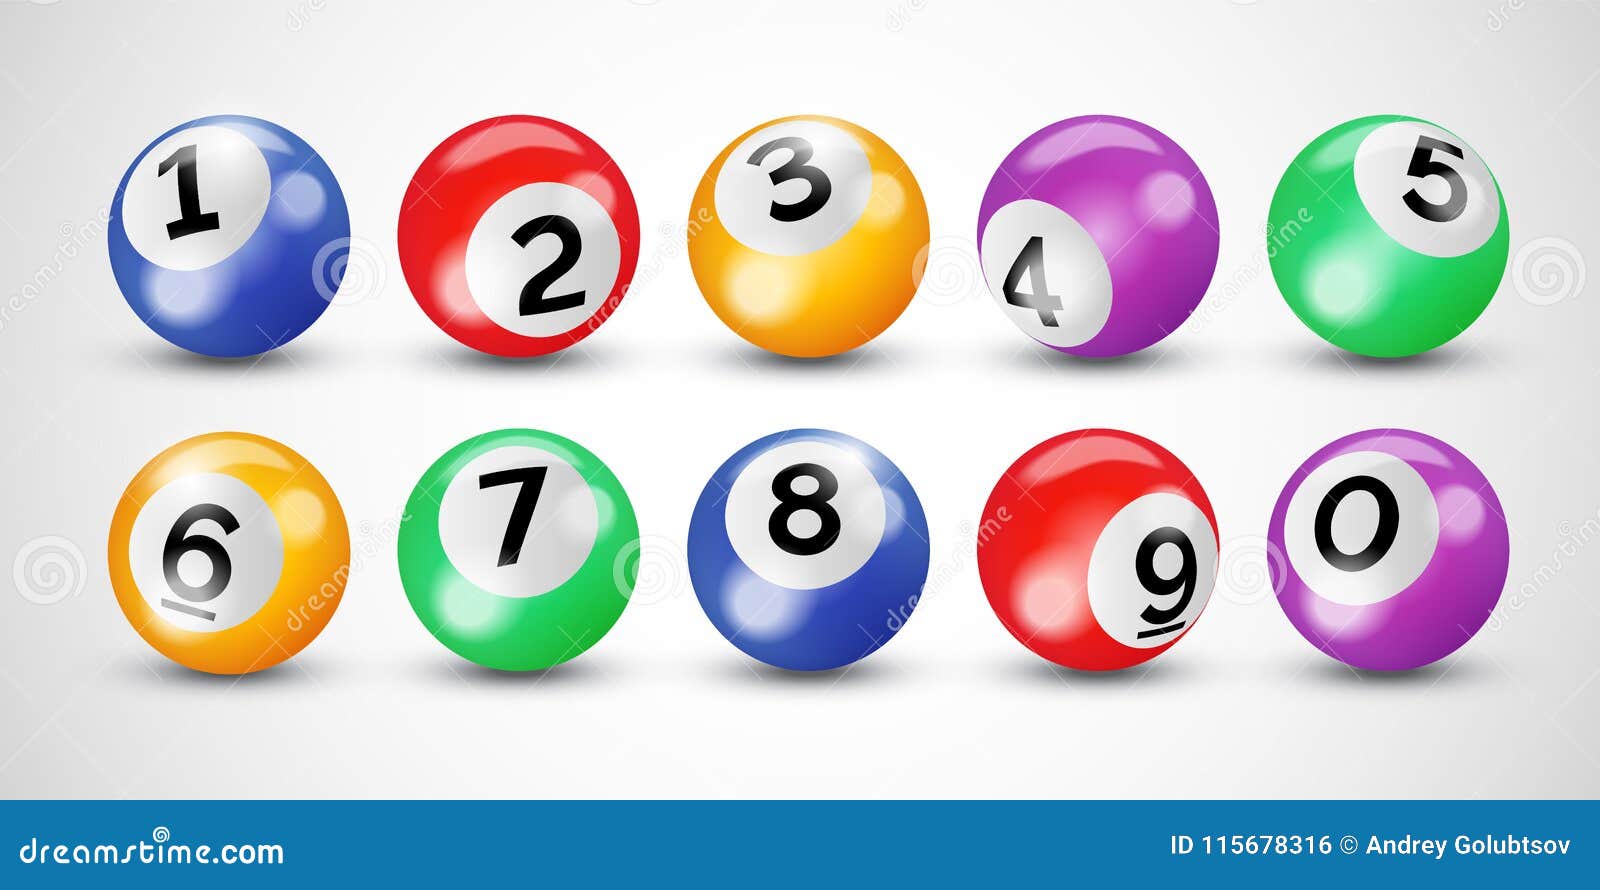 Bingo Lottery Balls With Numbers For Keno Lotto Or ...
